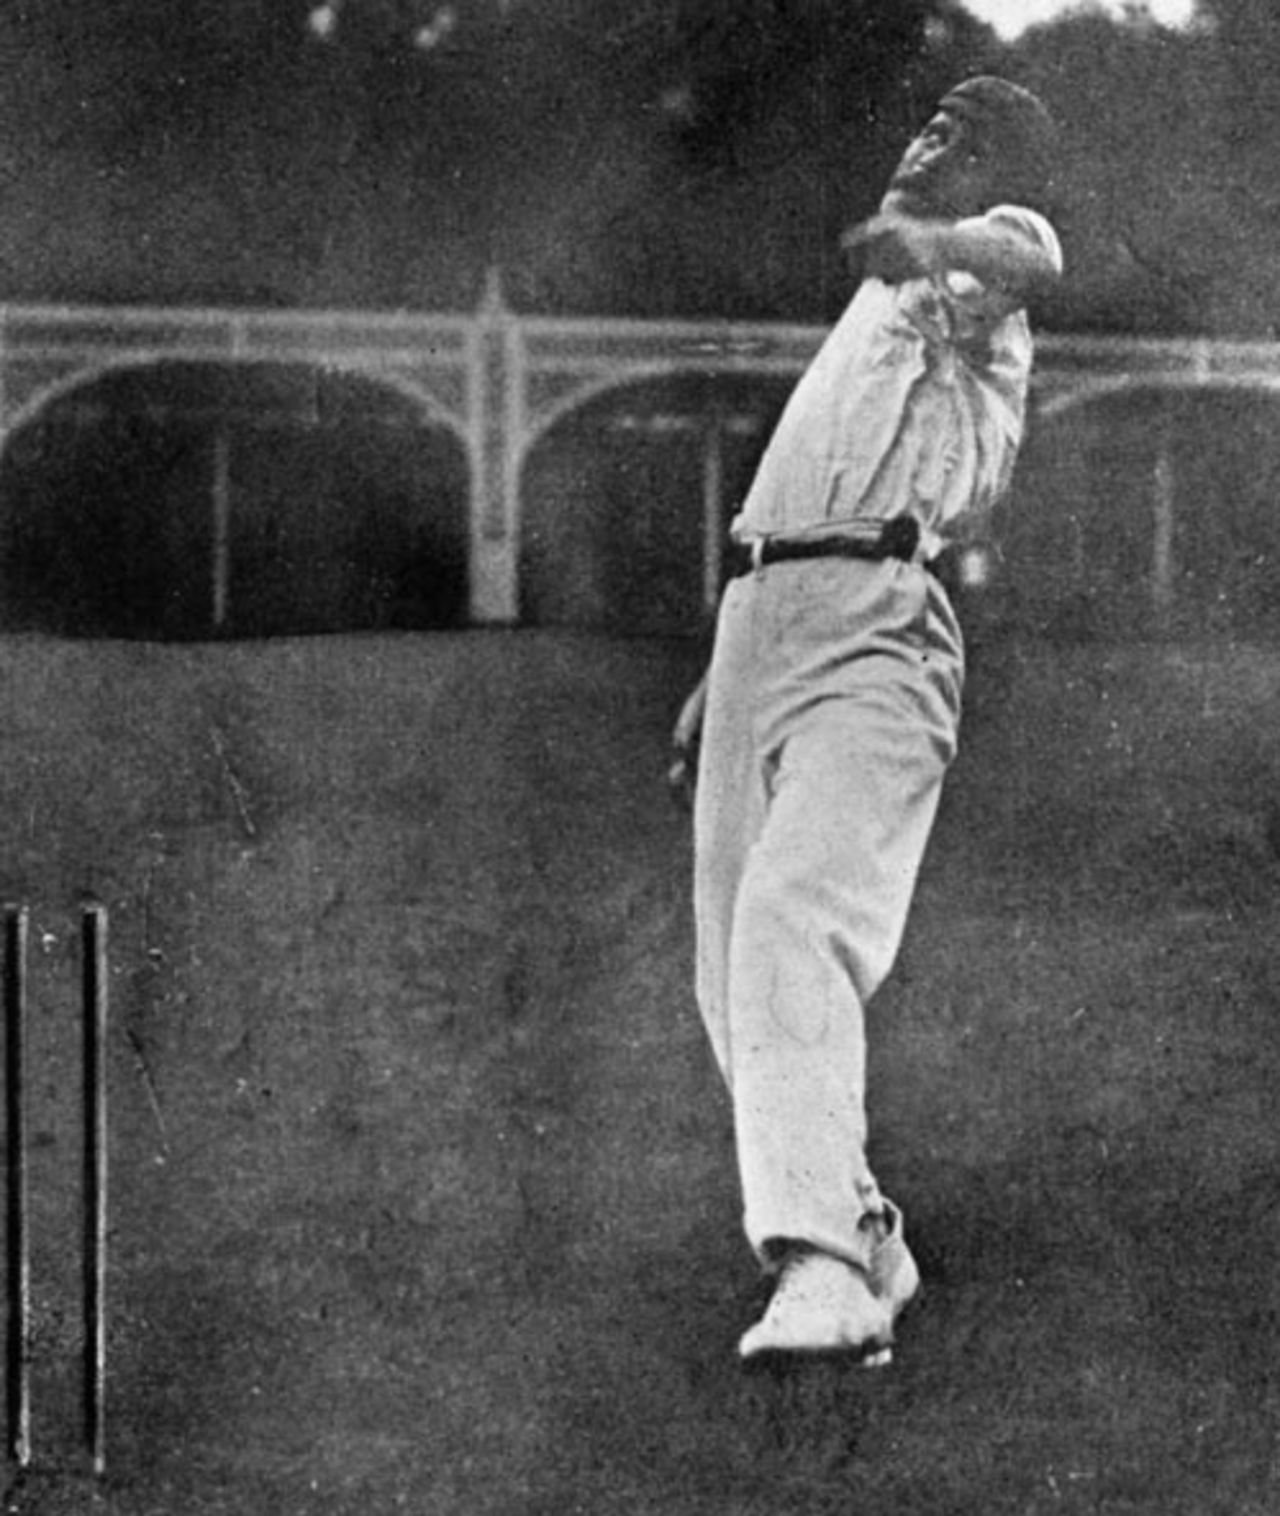 Sydney Barnes demonstrates his bowling action, 1910